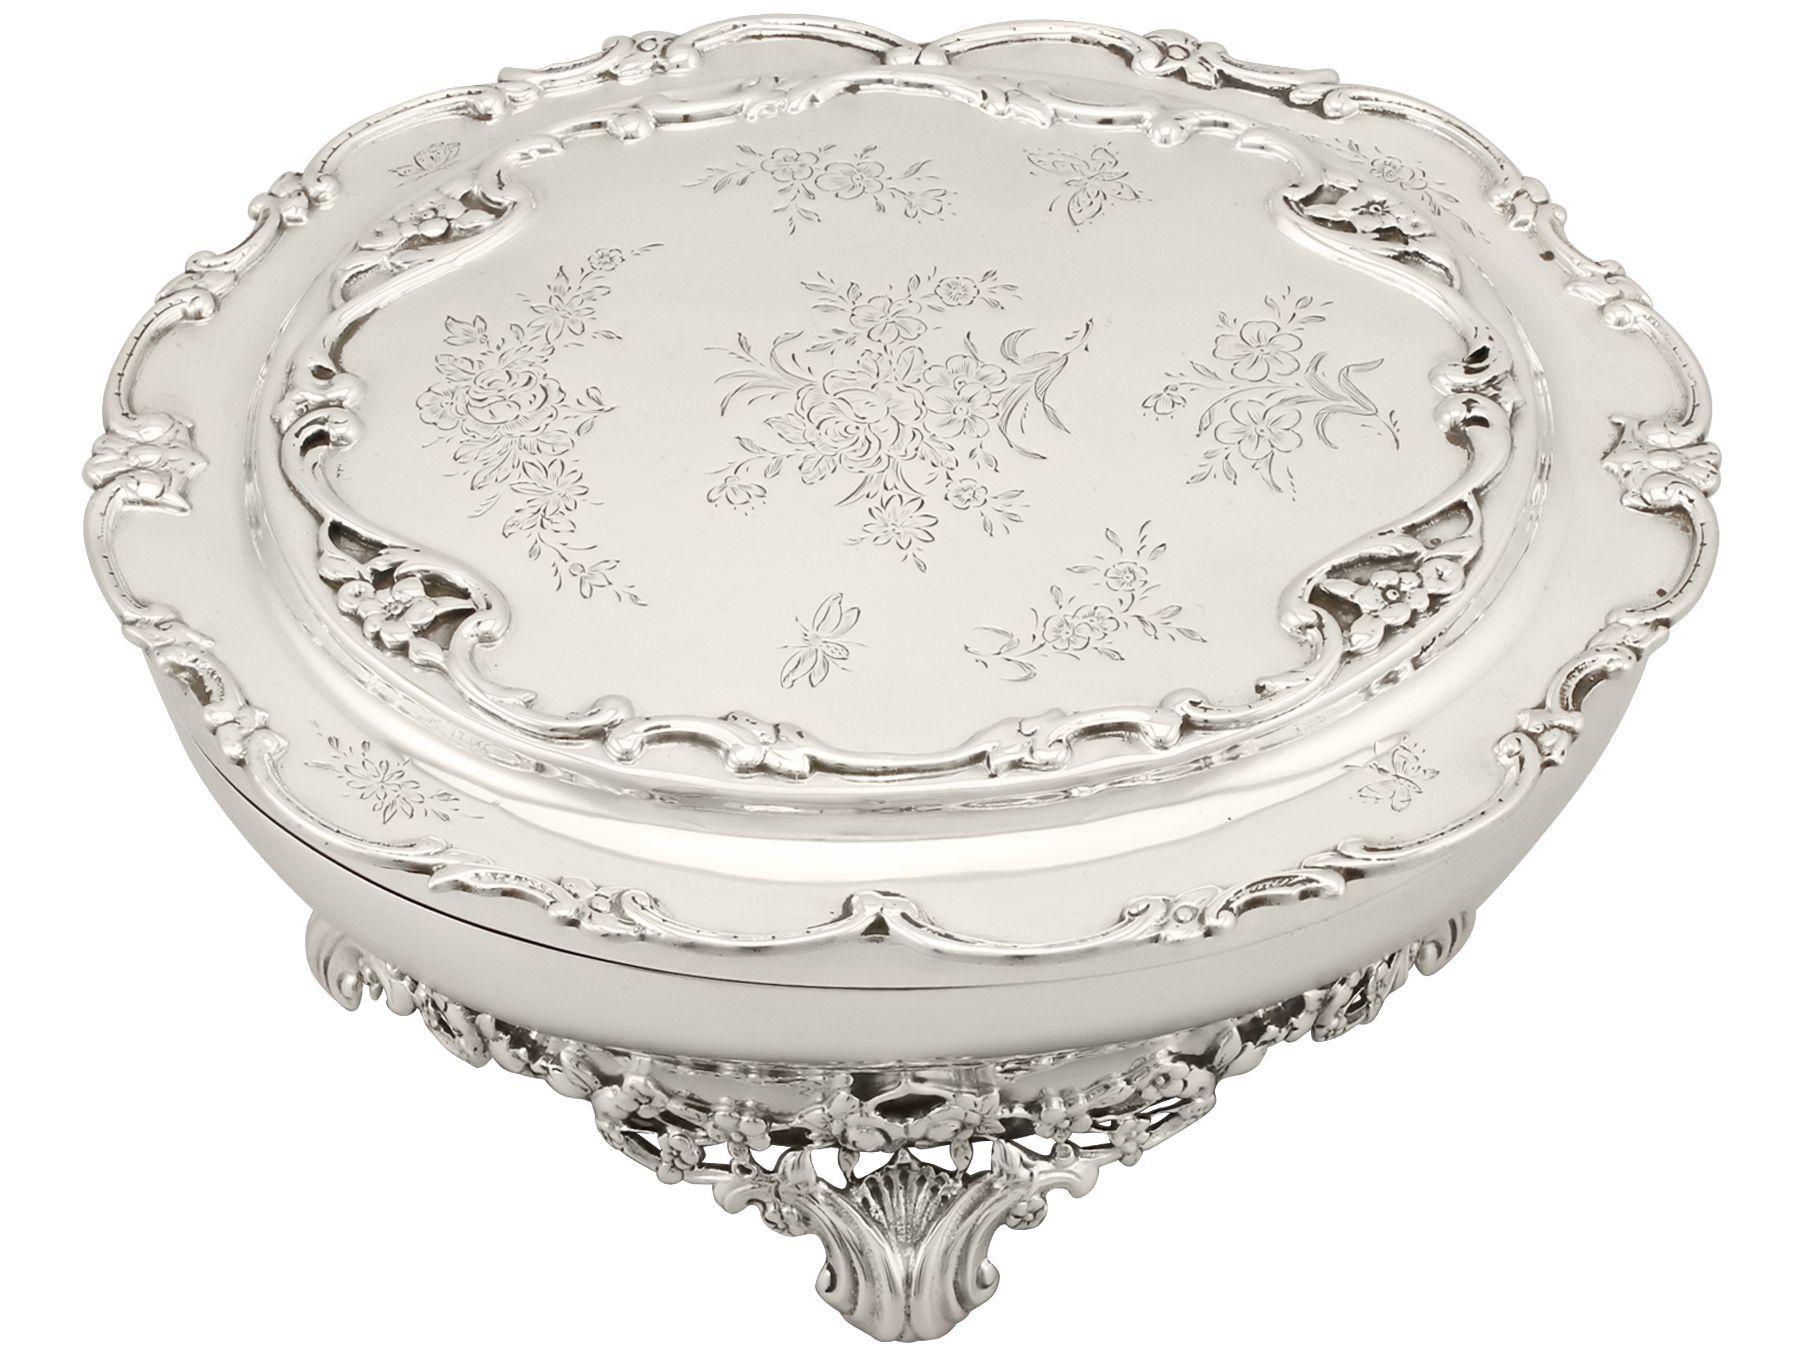 An exceptional, fine and impressive antique Edwardian English sterling silver jewelry/trinket box; an addition to our ornamental silverware collection

This exceptional antique Edwardian sterling silver jewelry box has an oval rounded shaped